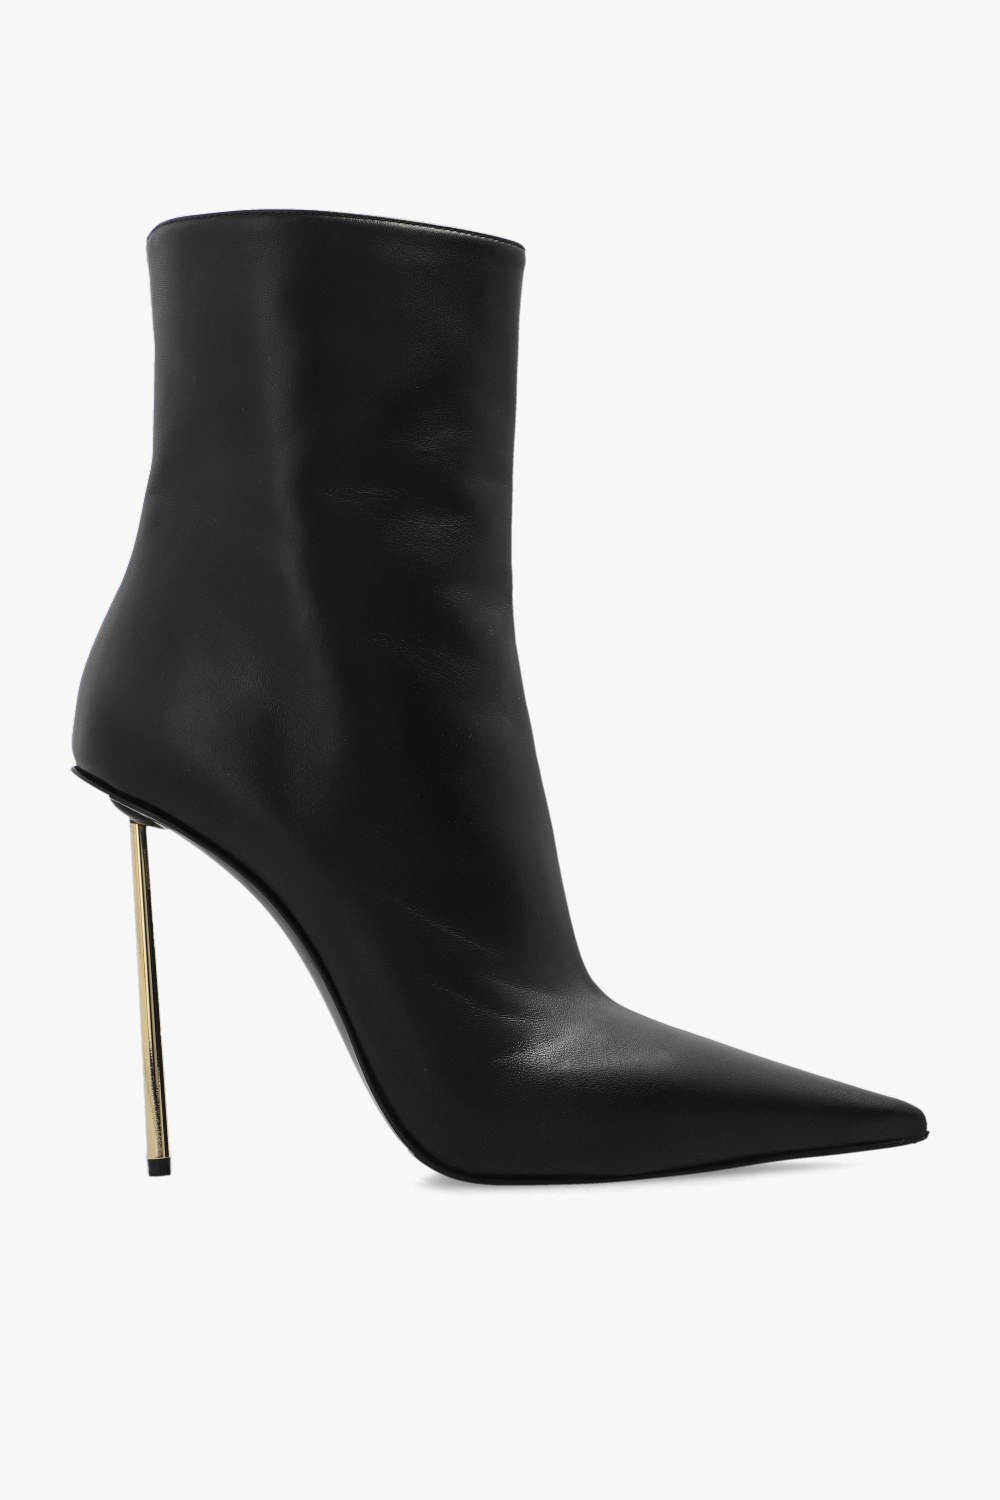 Le Silla ‘Bella’ heeled ankle boots